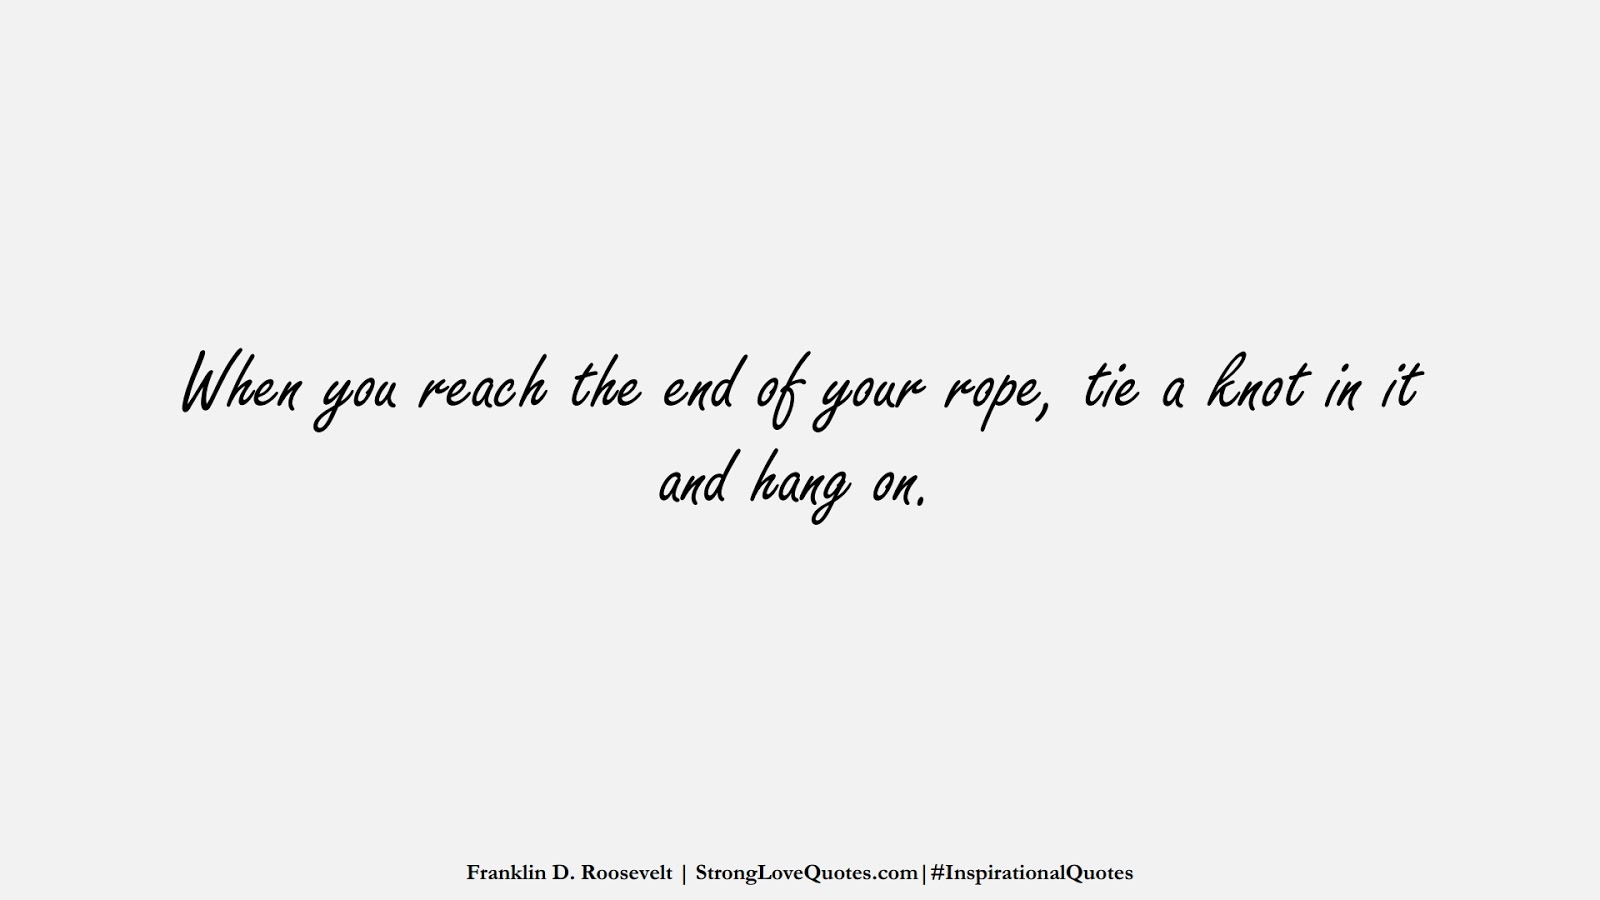 When you reach the end of your rope, tie a knot in it and hang on. (Franklin D. Roosevelt);  #InspirationalQuotes